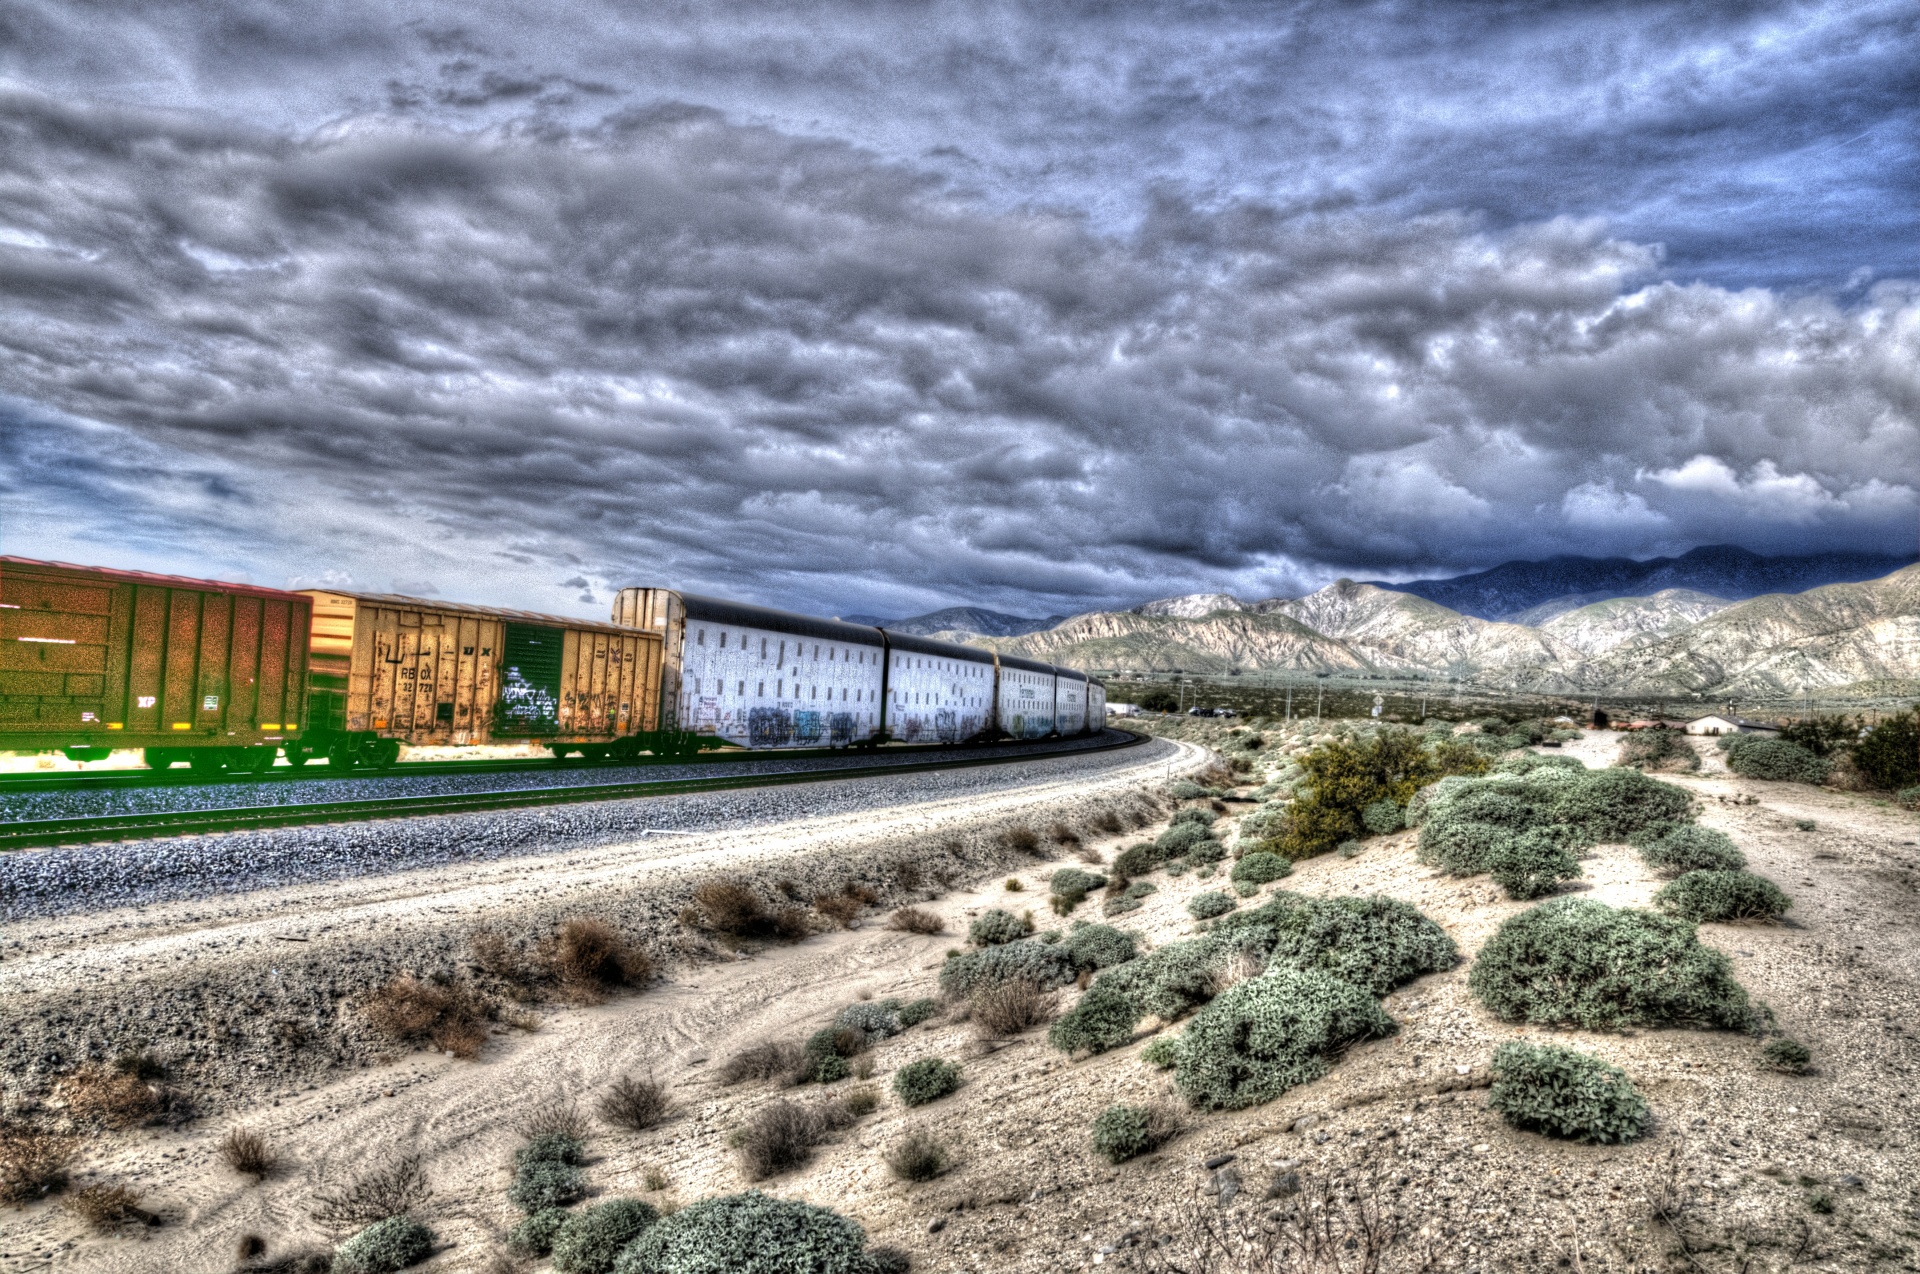 artistic touch applied to landscape photo of train moving through California Desert